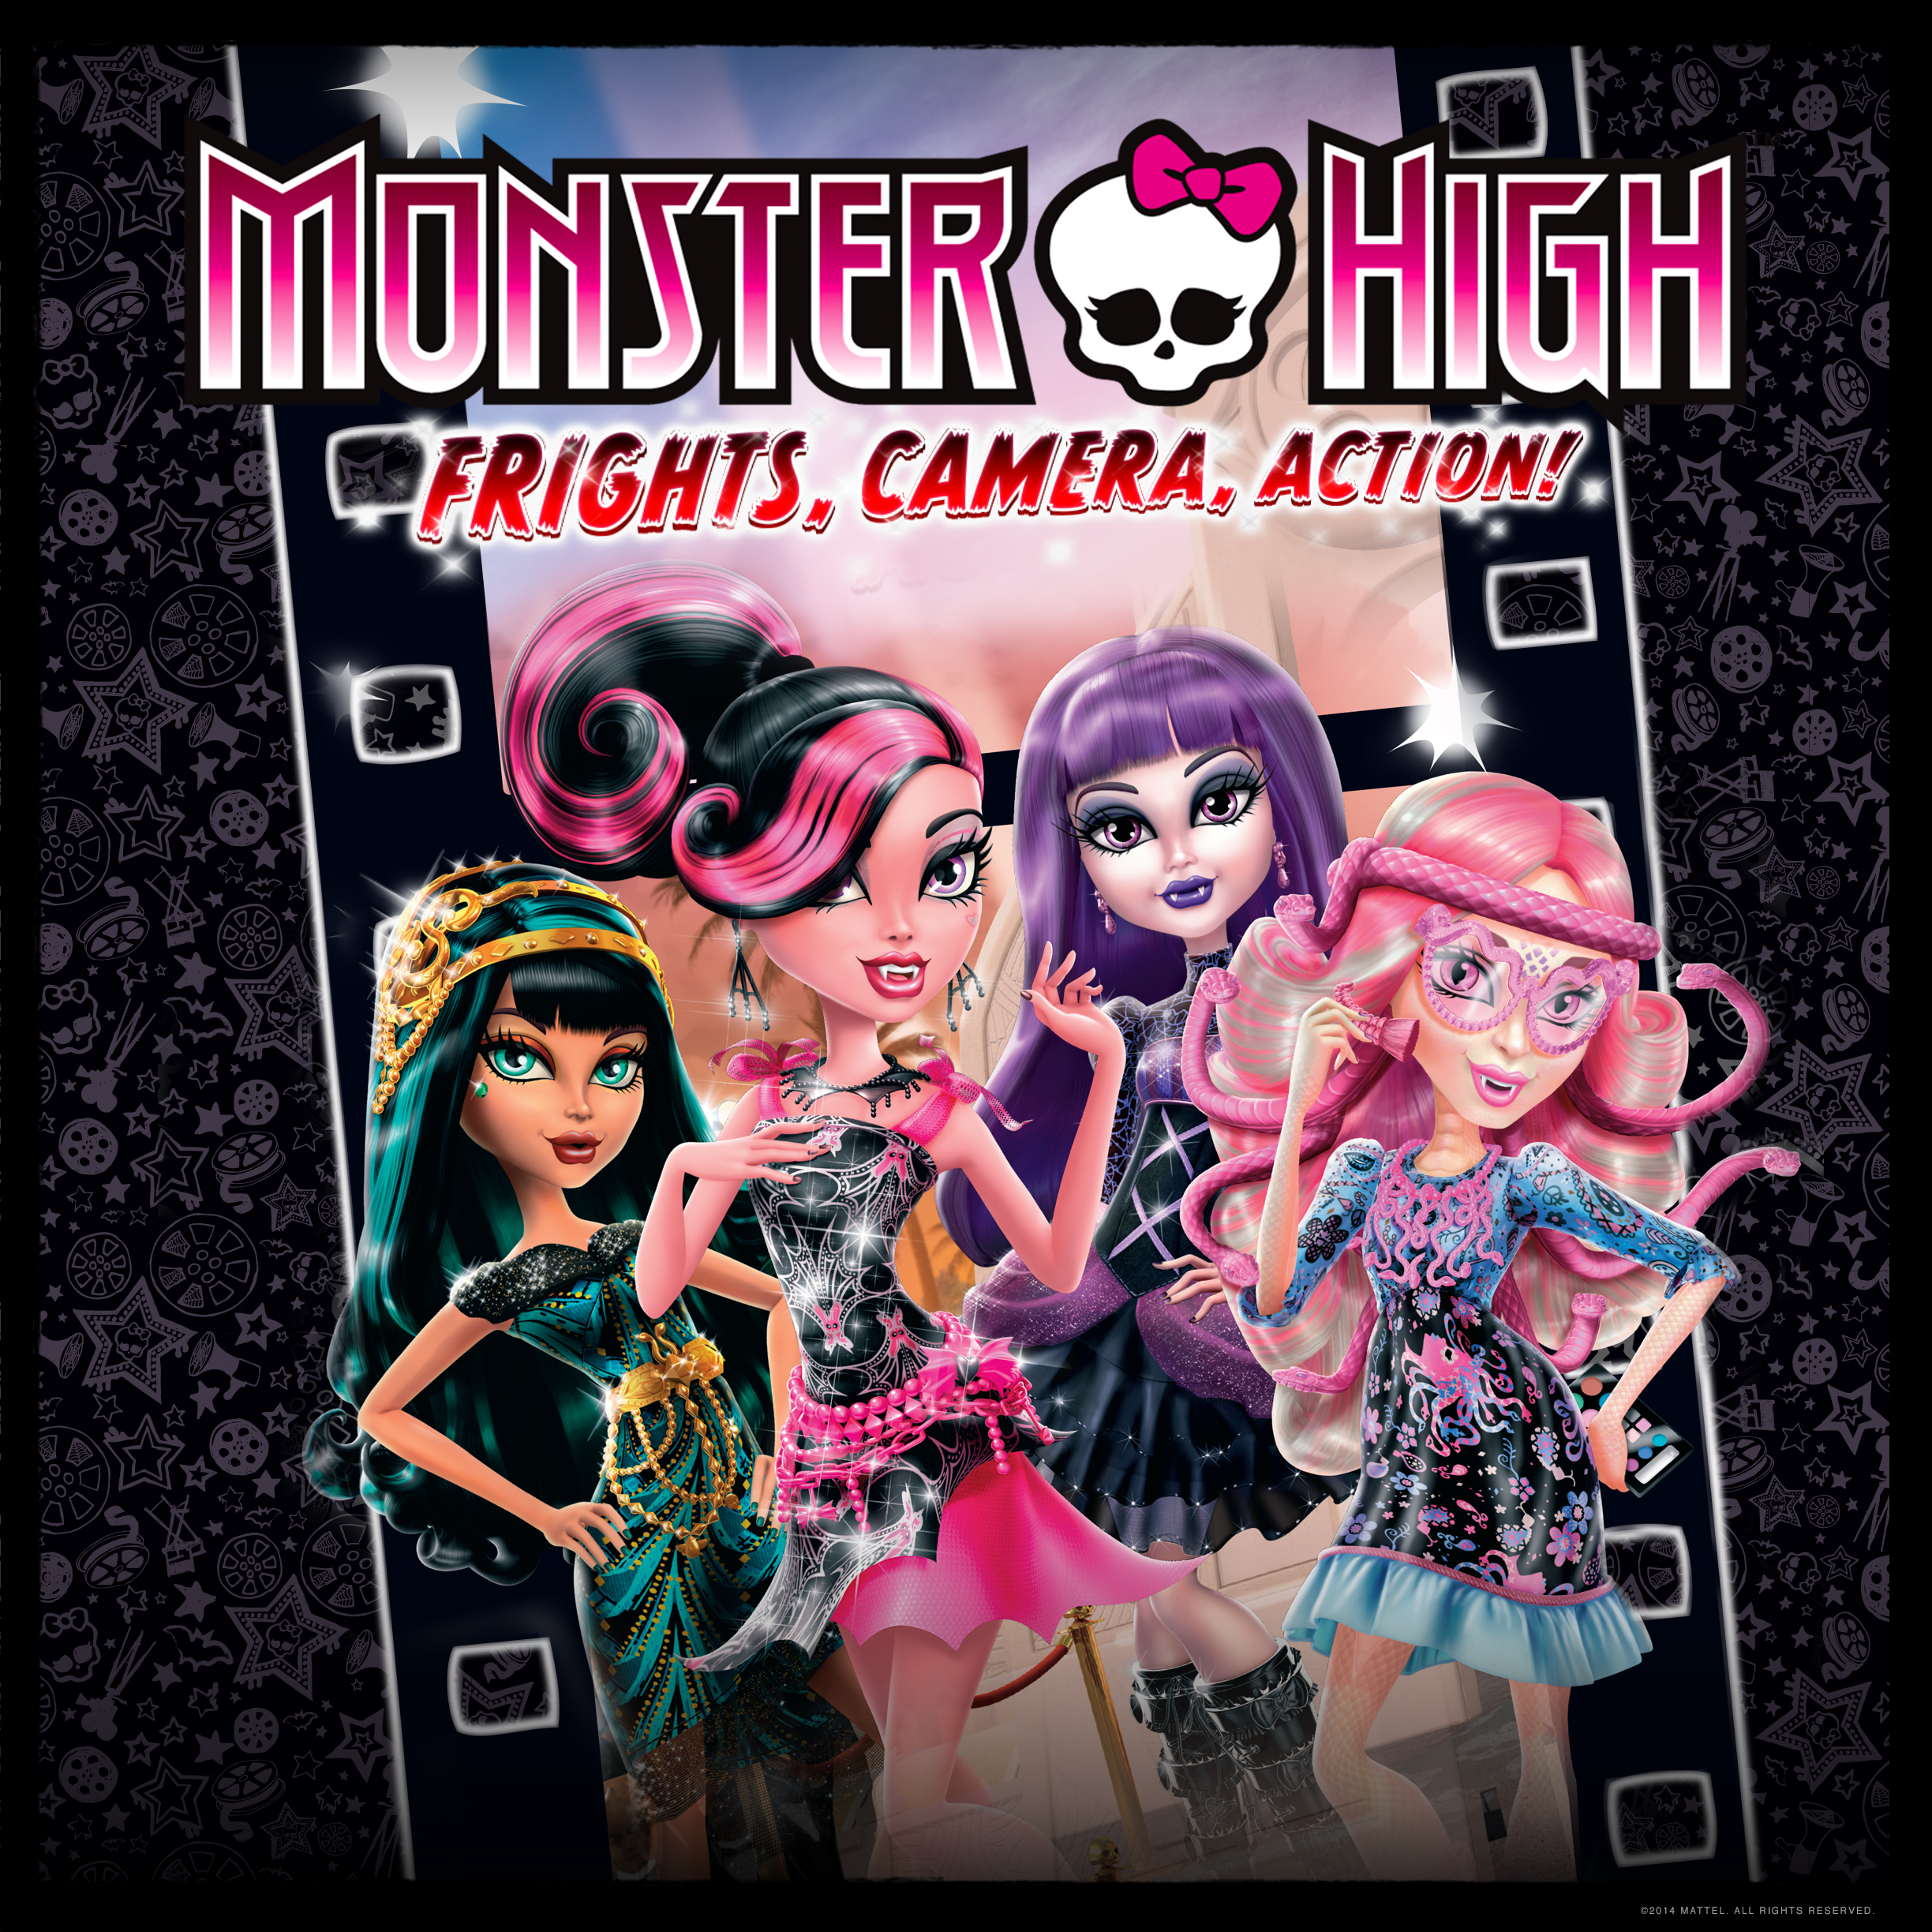 Images of Monster High: Frights, Camera, Action! | 2448x2448